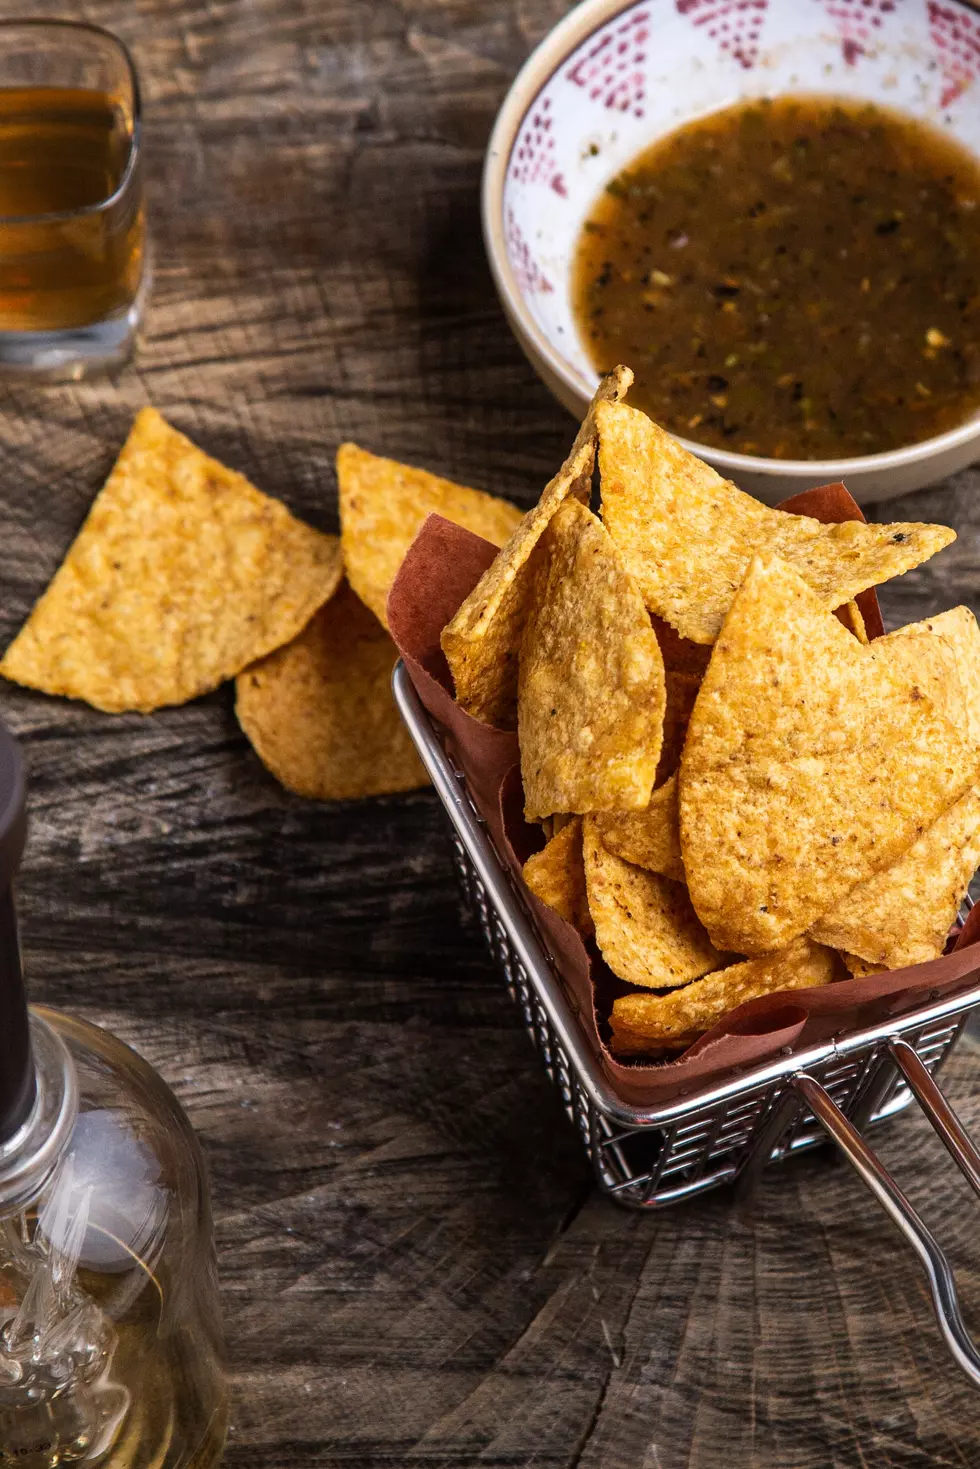 Top 5 Restaurants With The Best Chips And Salsa In Midland!